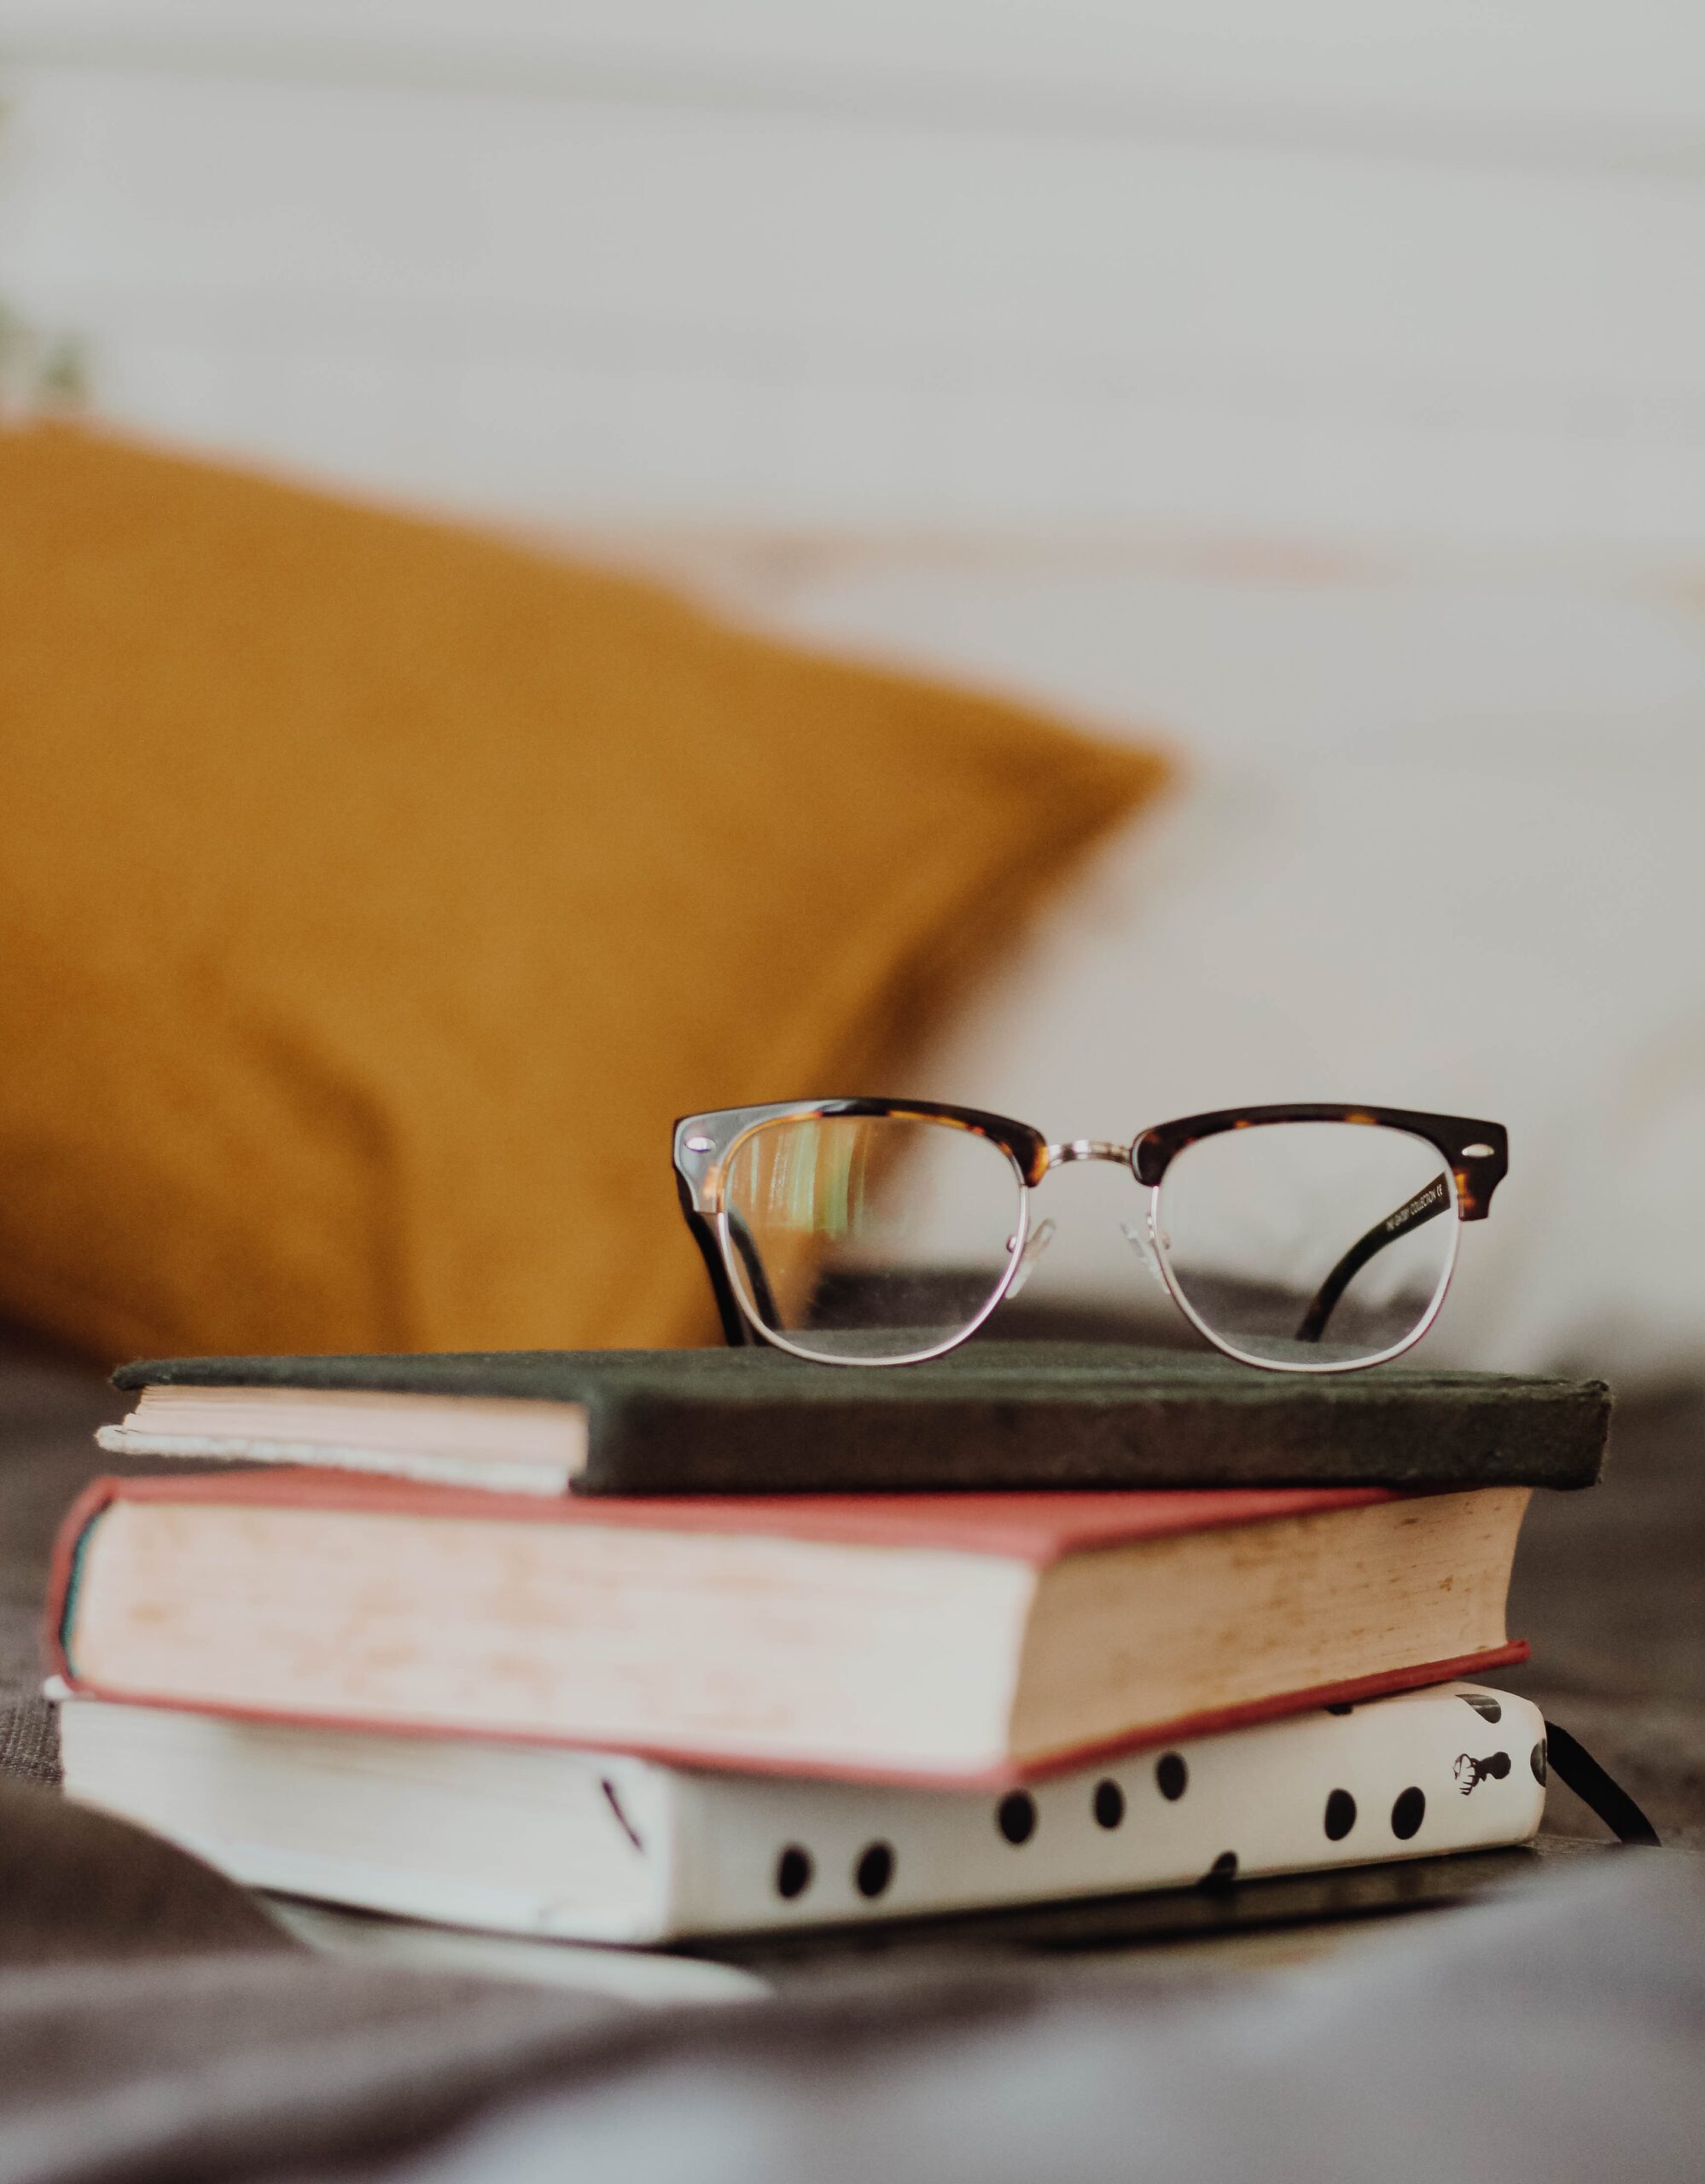 A small stack of books with glasses resting on top, an orange-ish pillow in the background